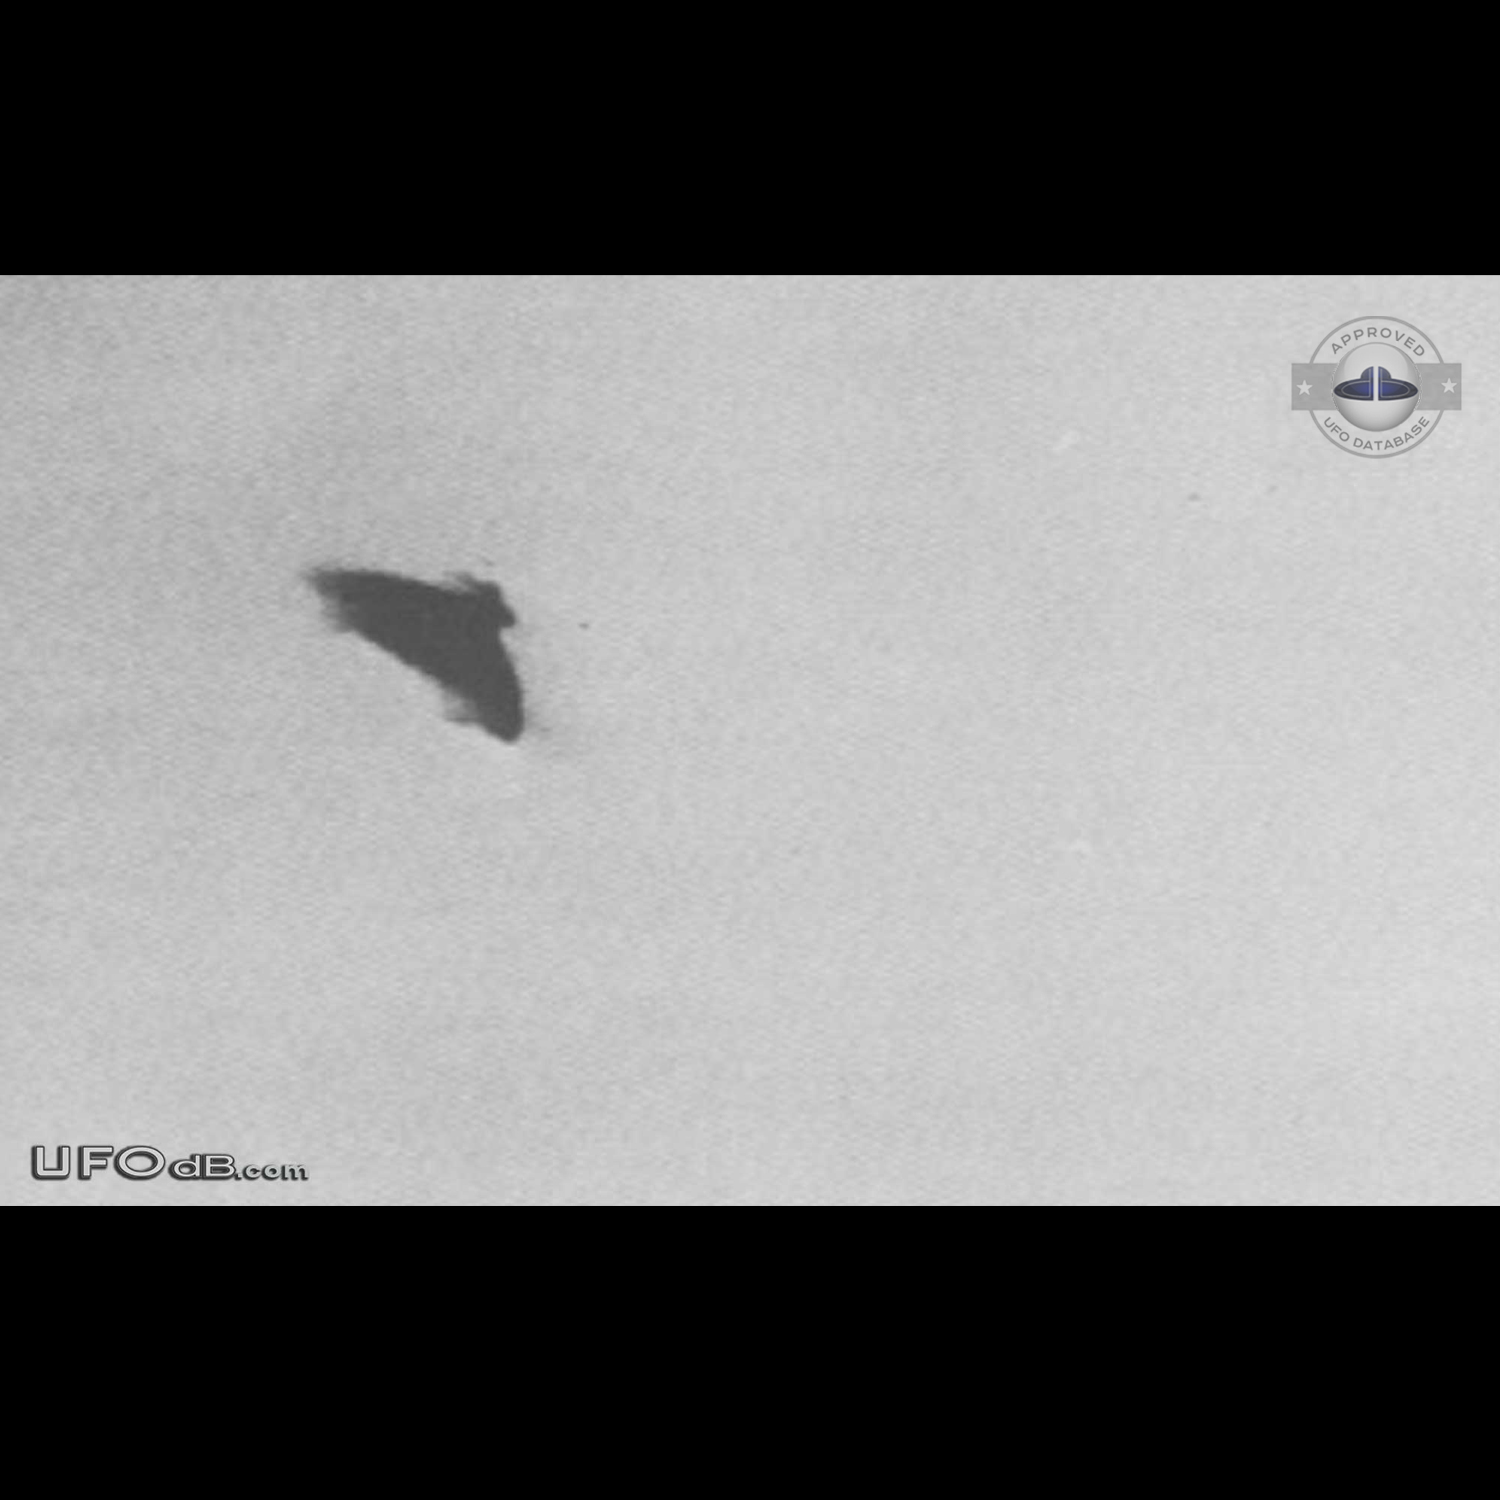 Bell Shaped UFO caught on picture in May 1975 in Chiba, Japan - Asia UFO Picture #447-1